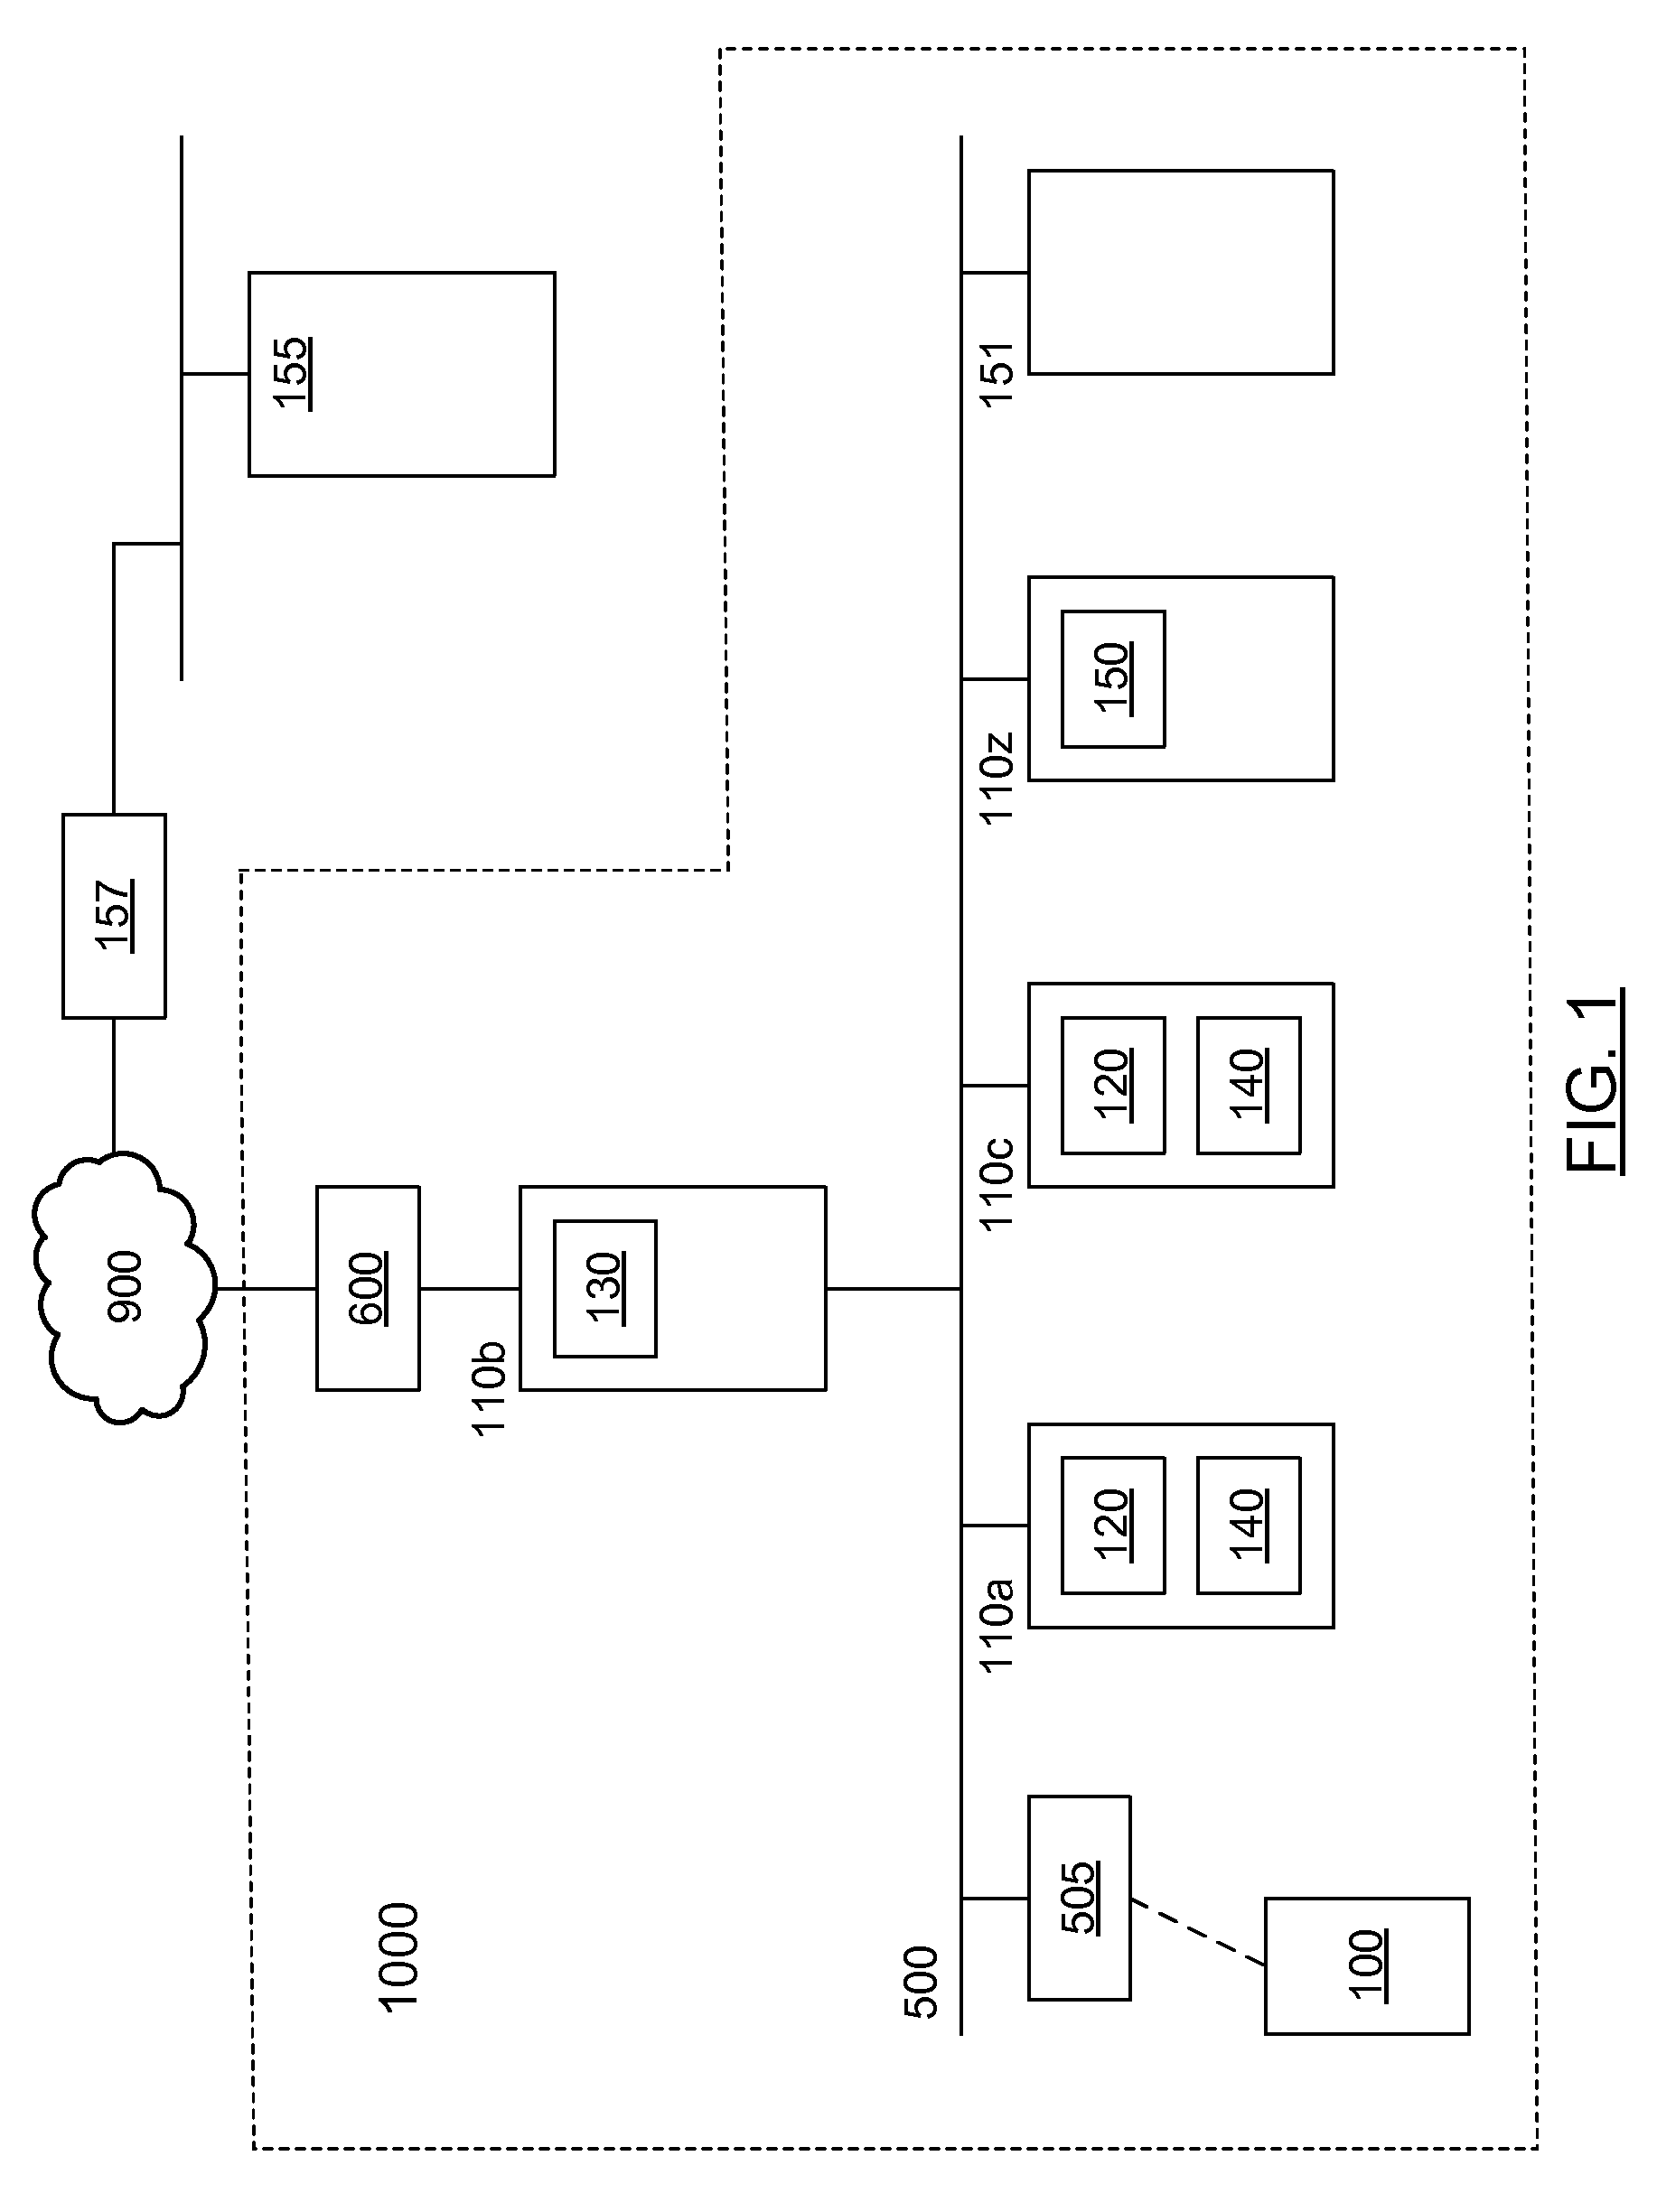 Pre-paid usage system for encoded information reading terminals